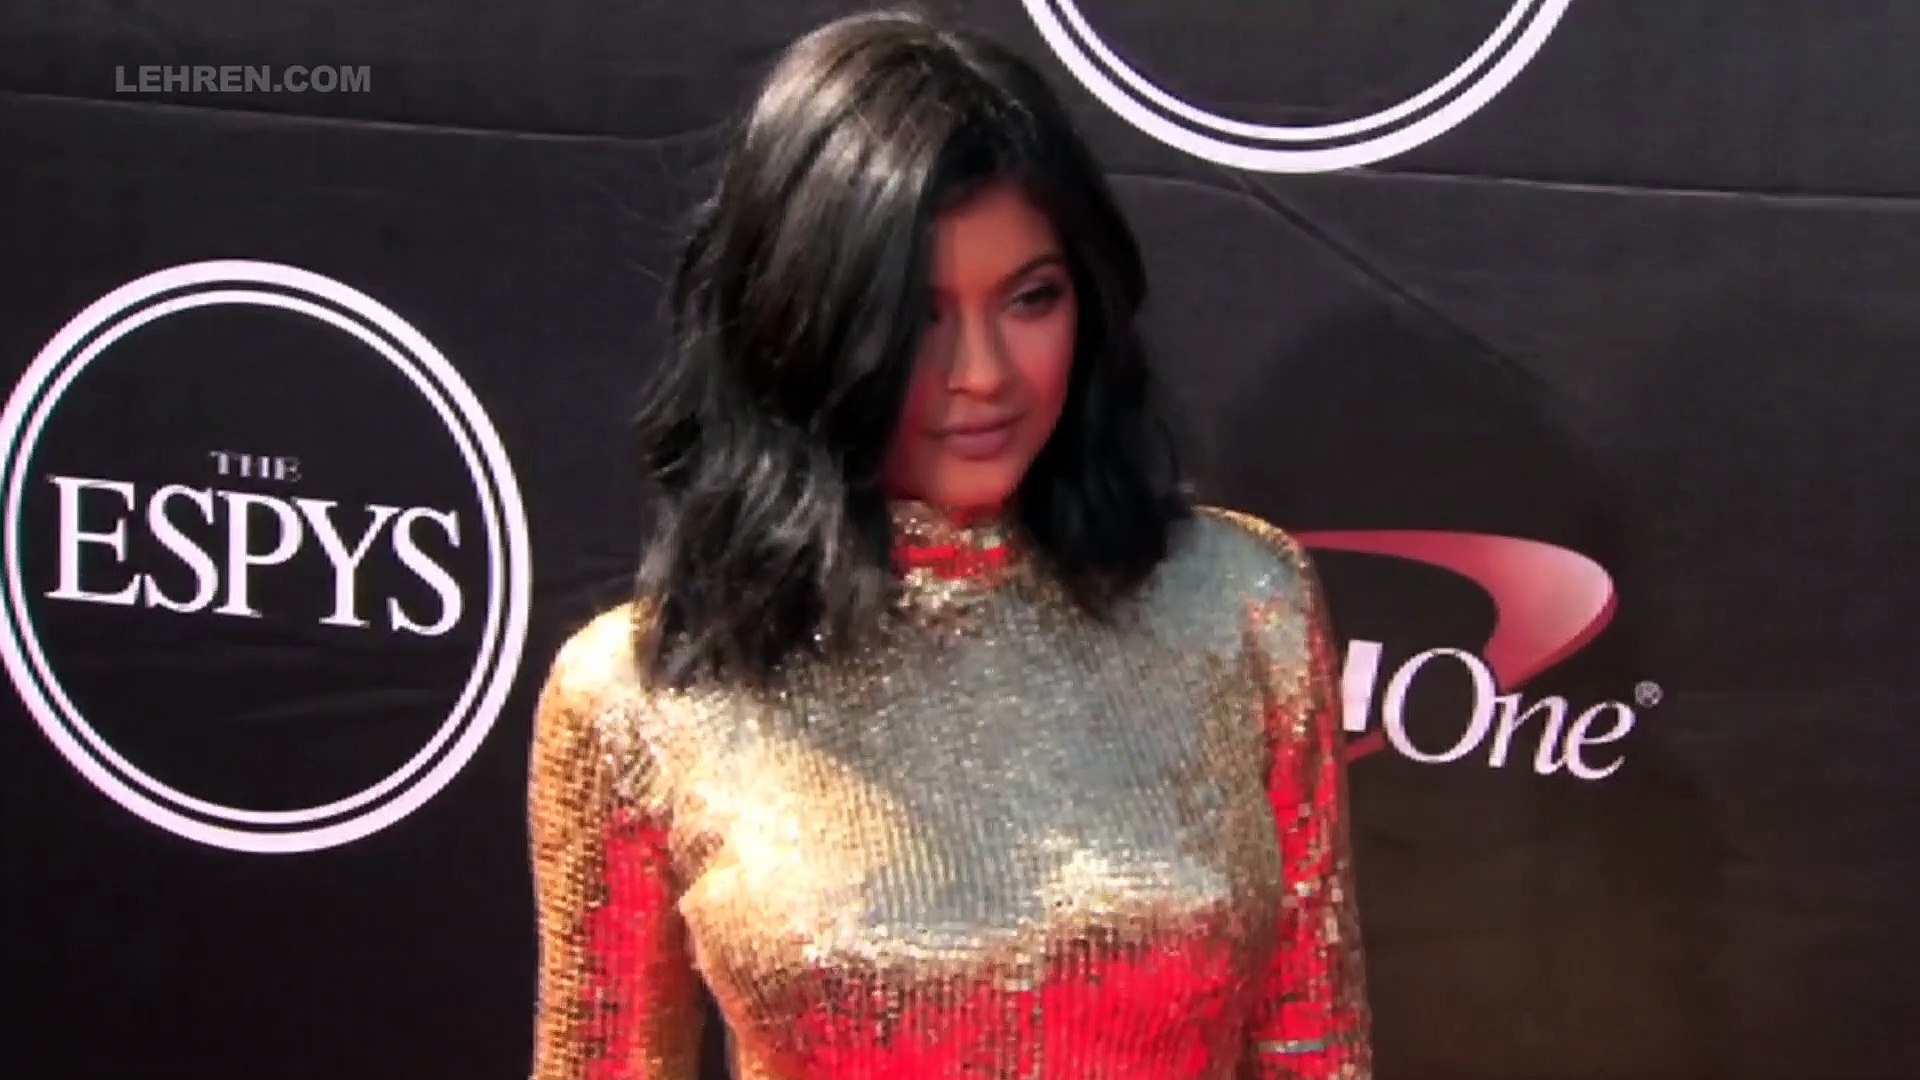 Kylie Jenner Celebrates Lasik Eye Surgery By Throwing A Party!